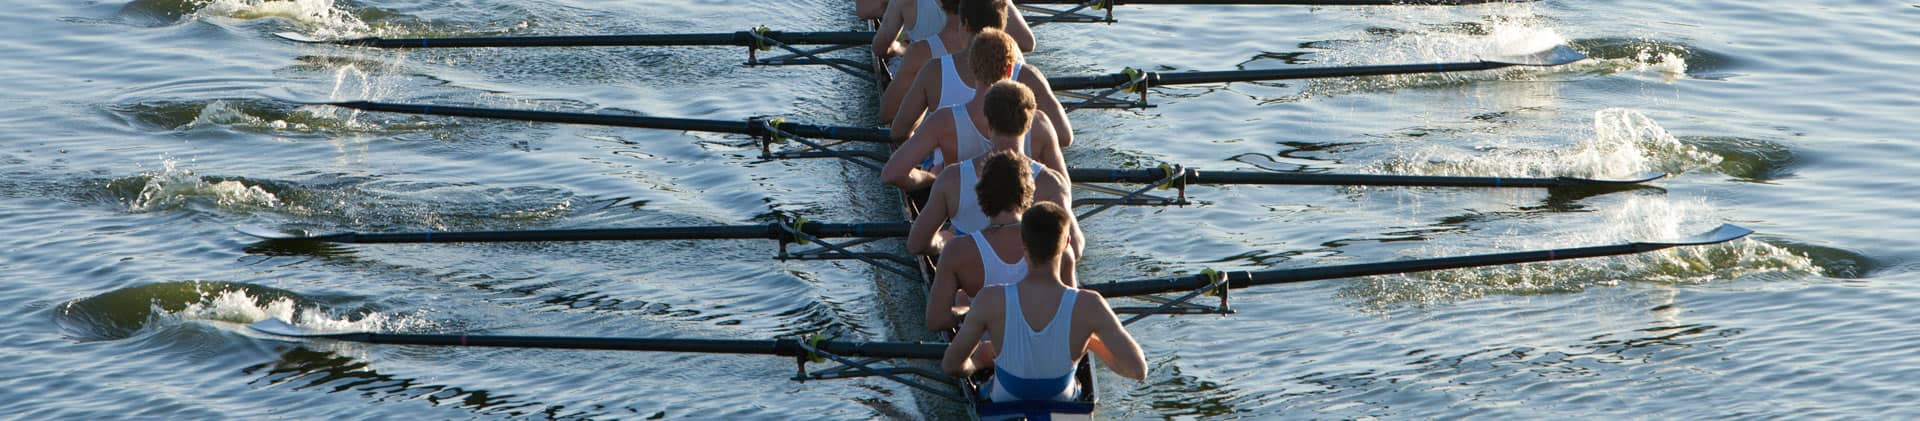 rowing on the river